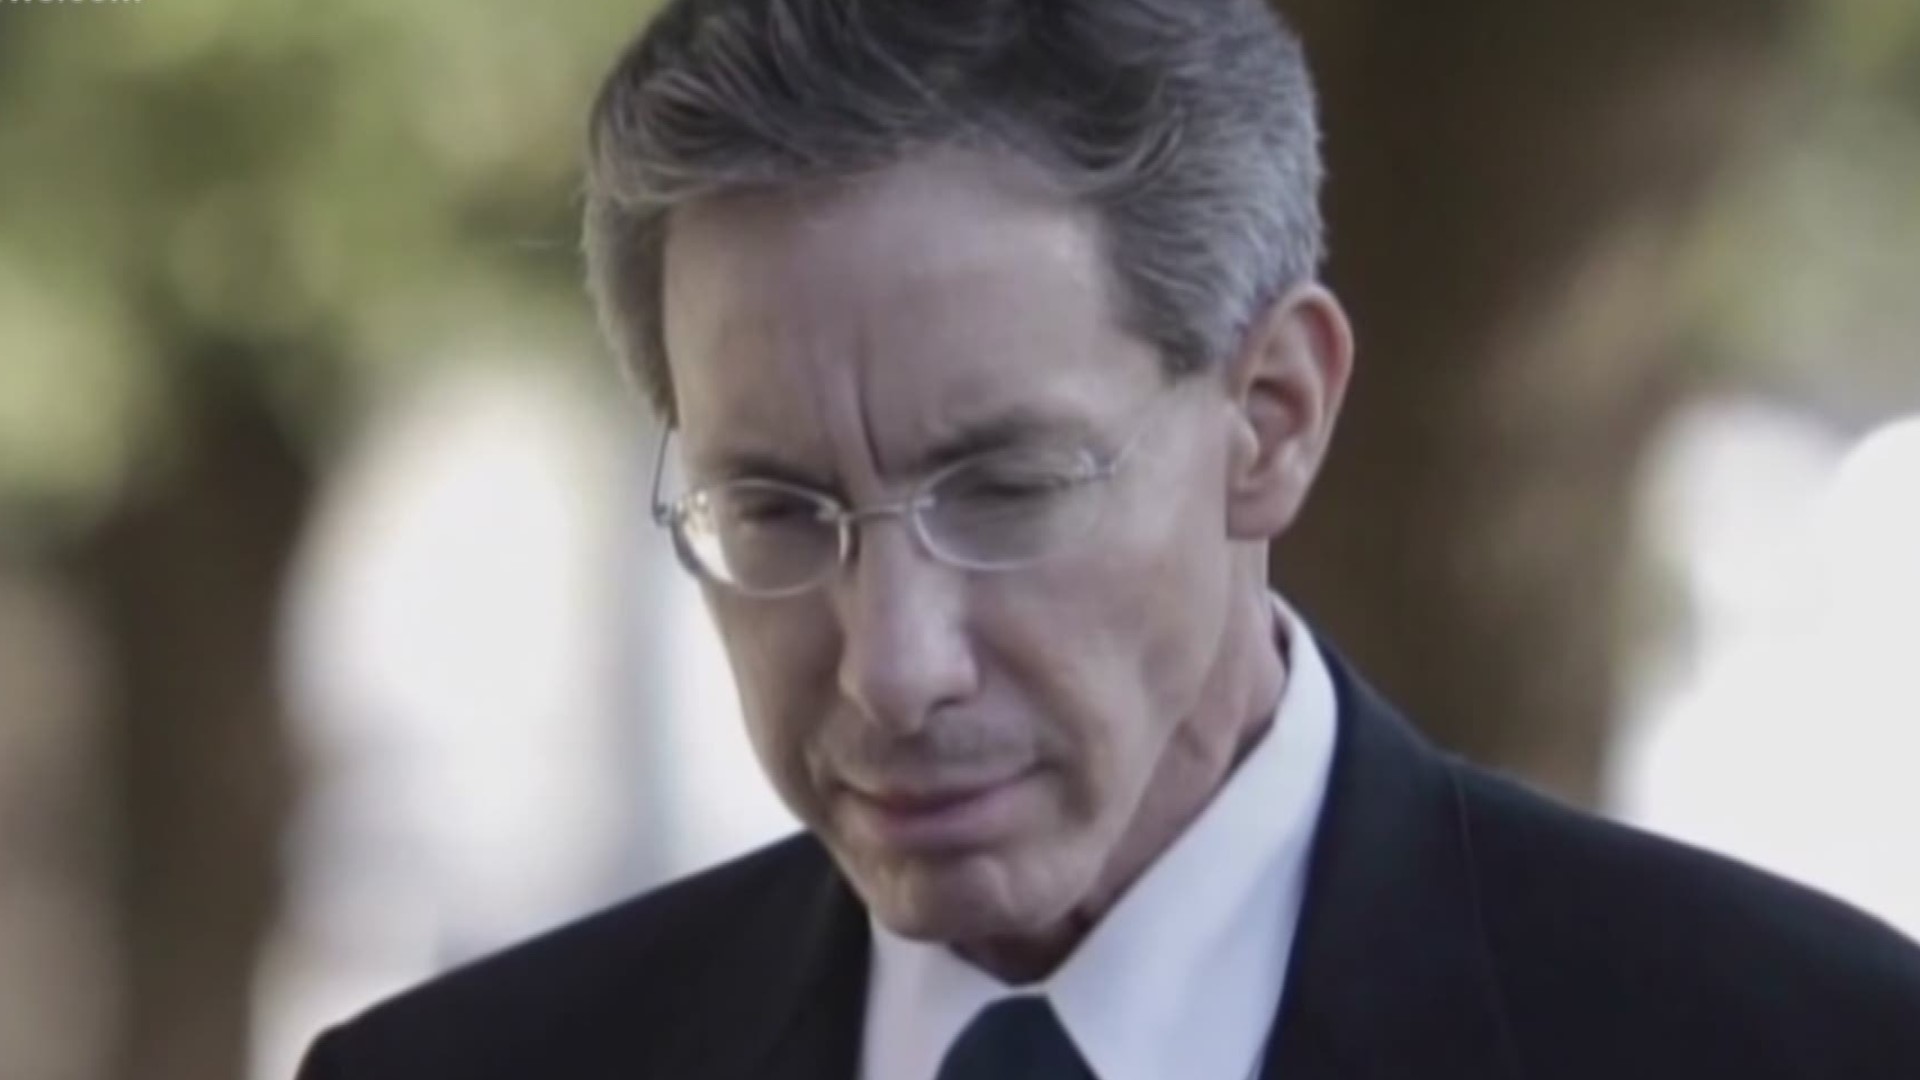 During his 13 years in federal custody, Warren Jeffs has tried to kill himself, gone on hunger strike and had to be force-fed, was placed in a medical coma and is now being labeled mentally incompetent by his own attorney. Despite all of that, people familiar with the FLDS say they believe Warren Jeffs may still communicate with thousands of people.